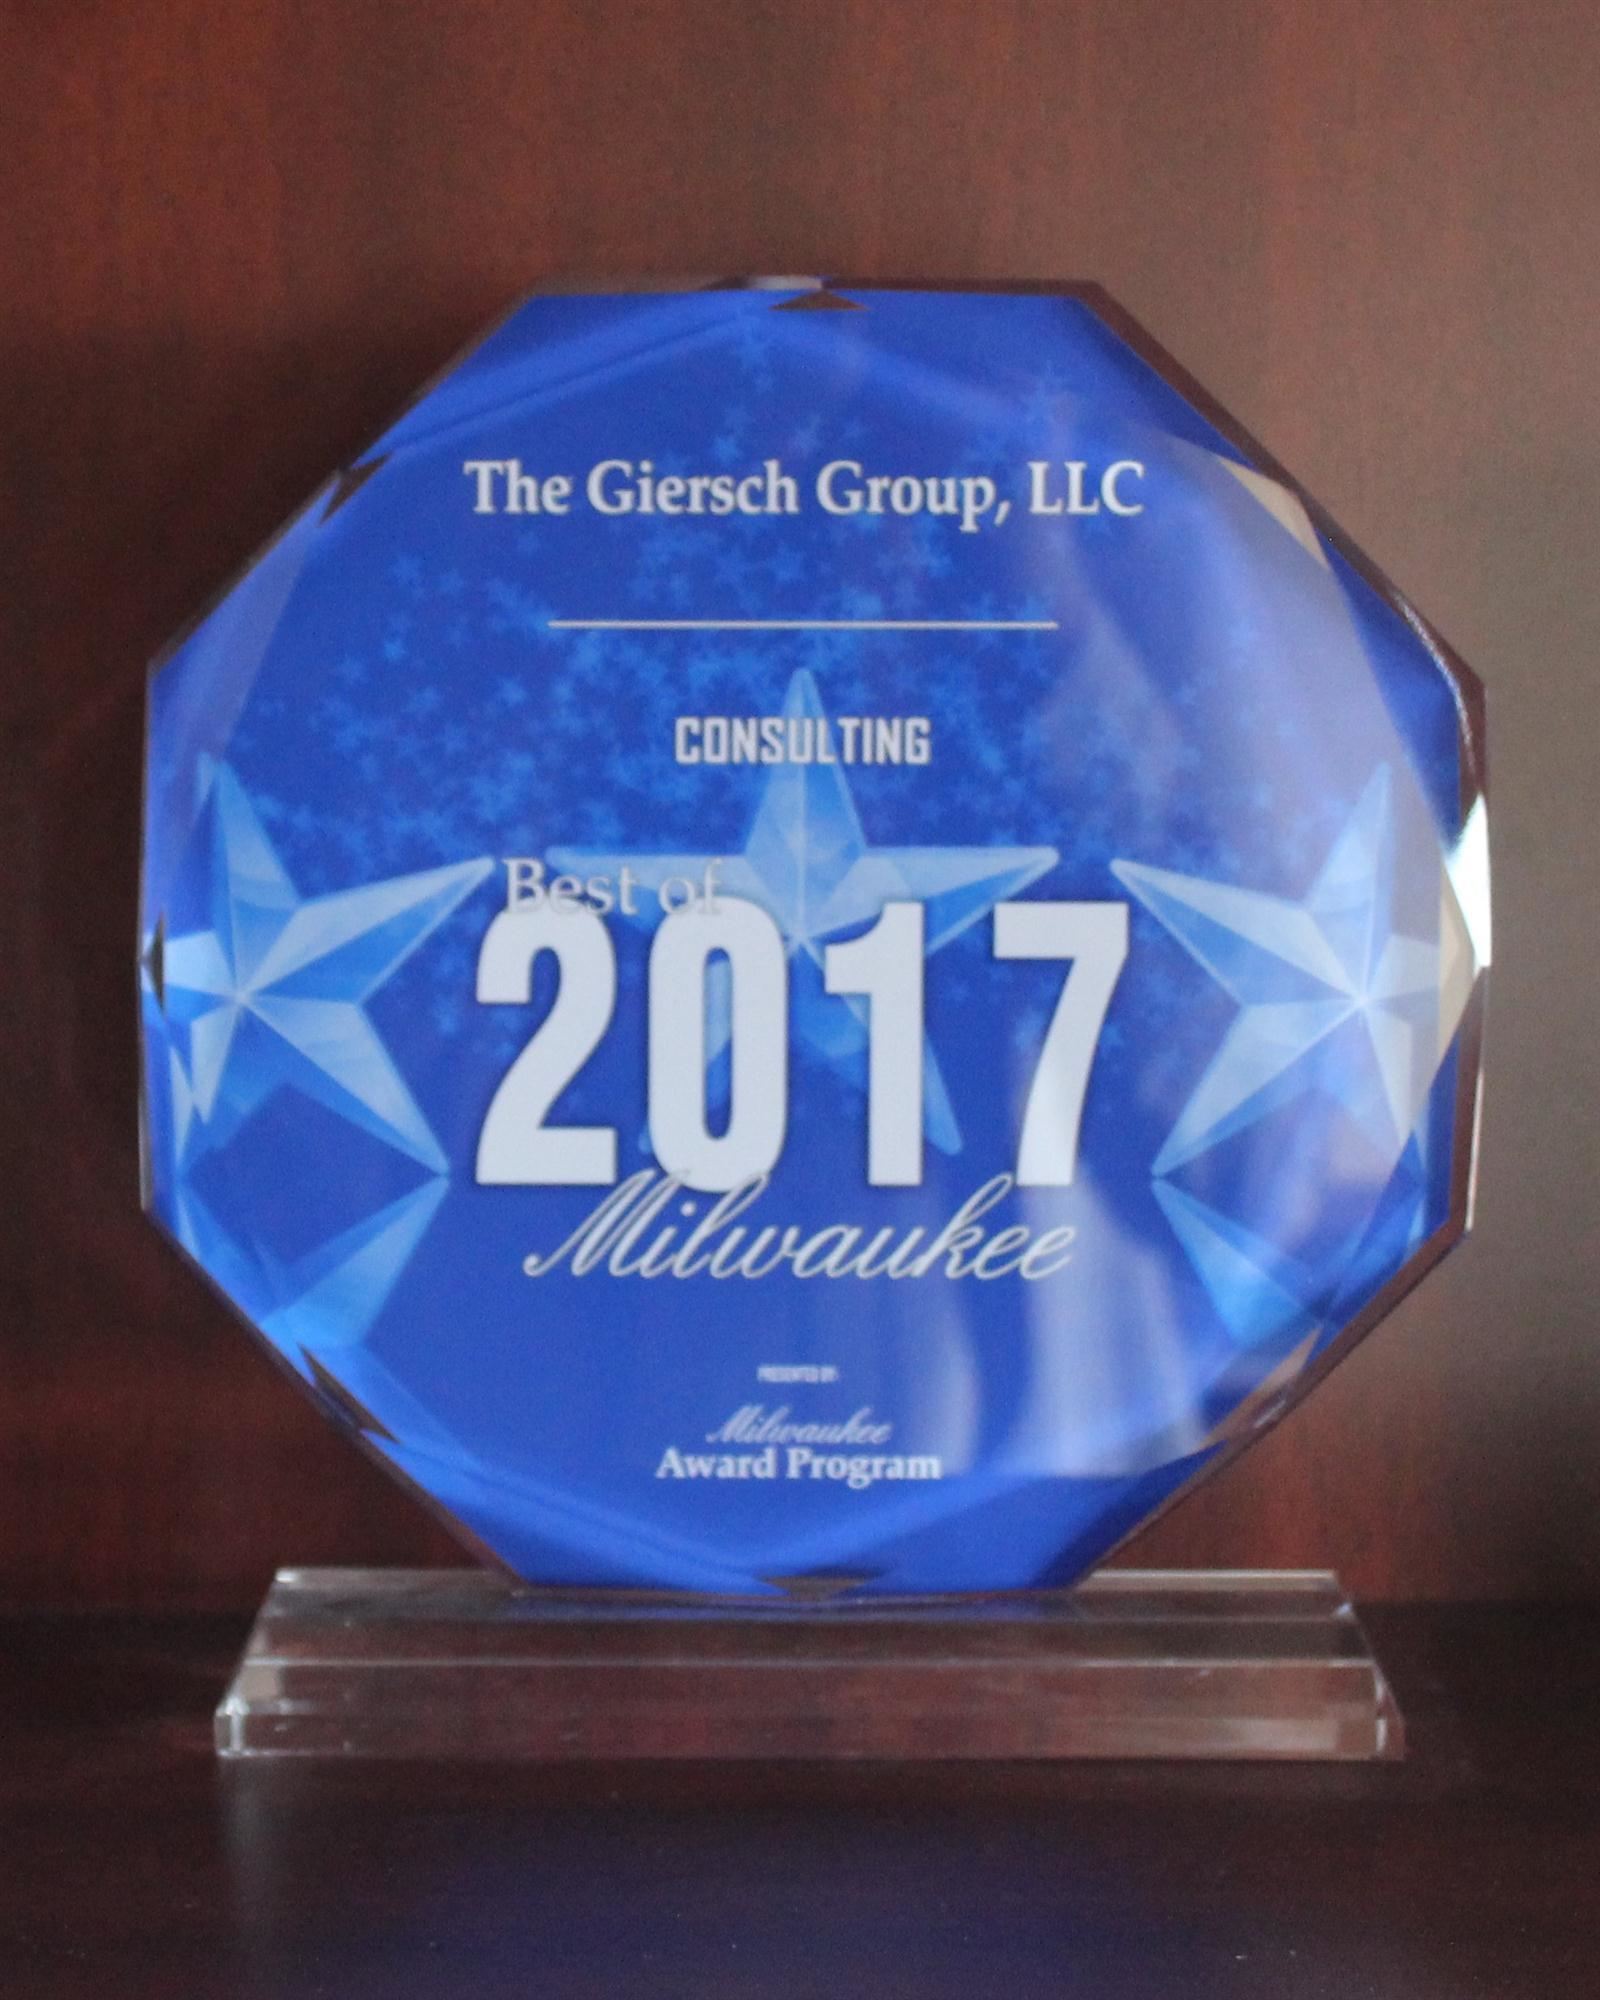 Best of Milwaukee Award 2017: Consulting Category